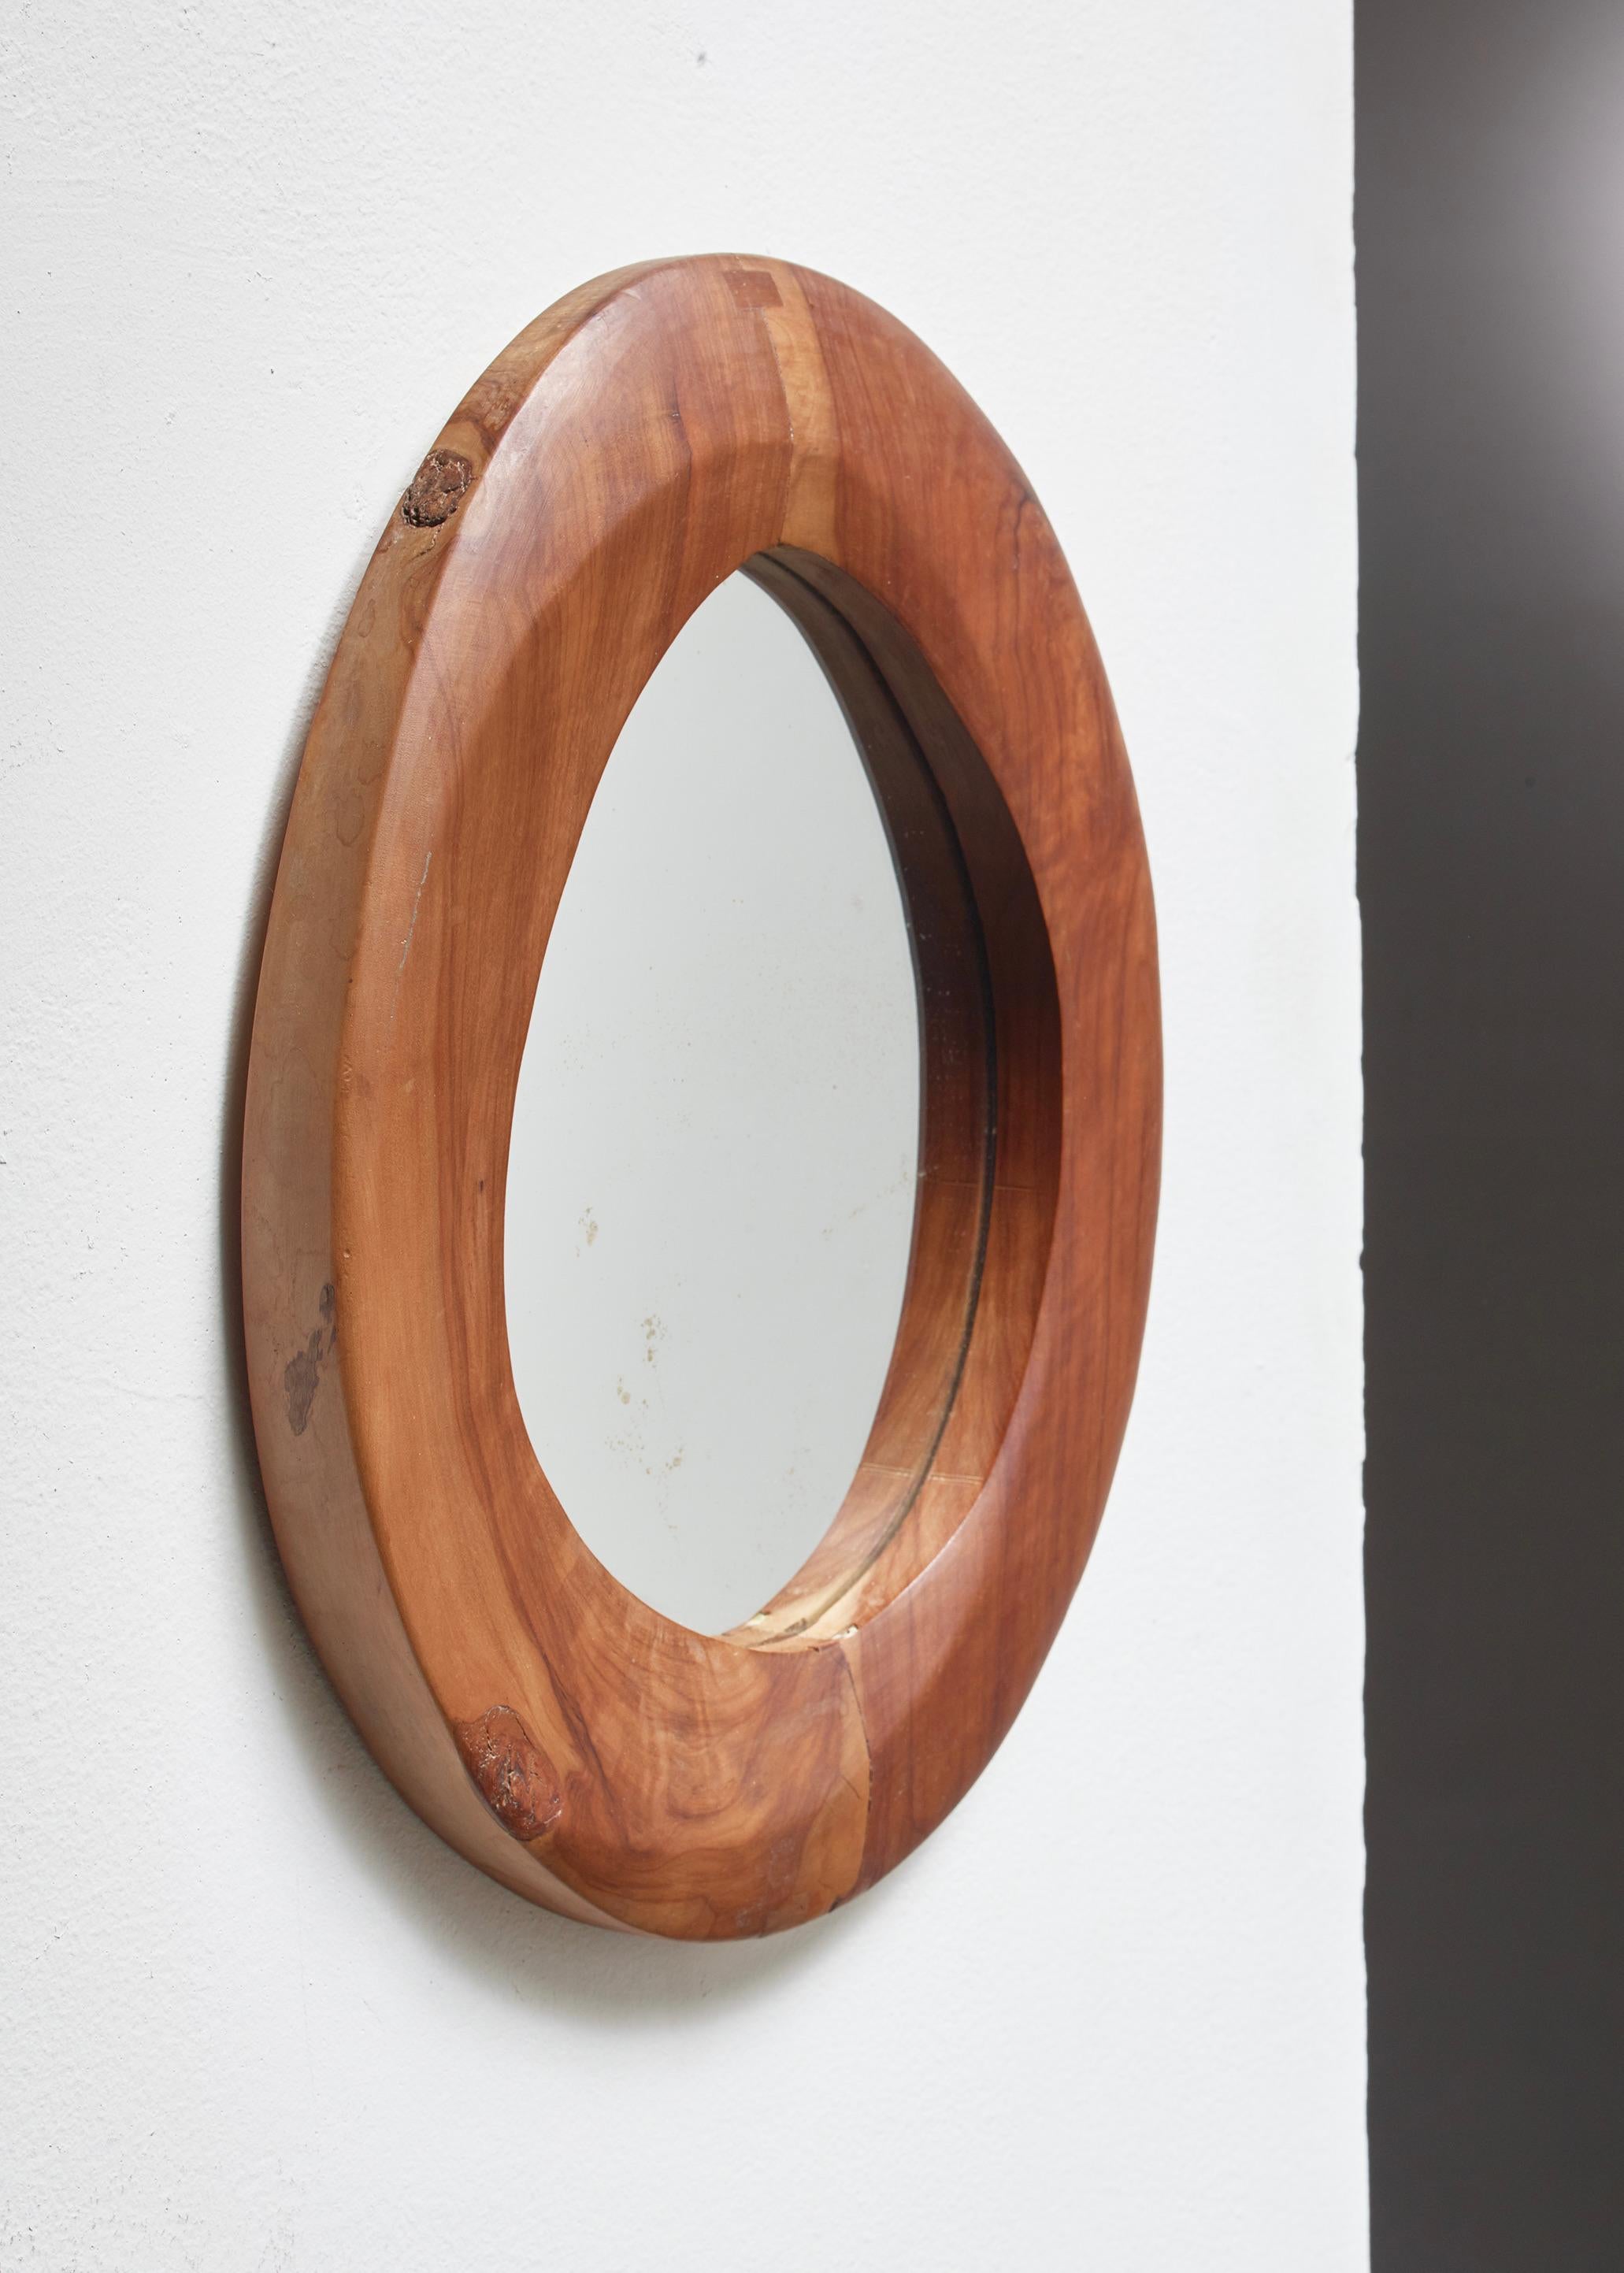 Arts and Crafts Free-Form Wooden Mirror, France, 1950s For Sale